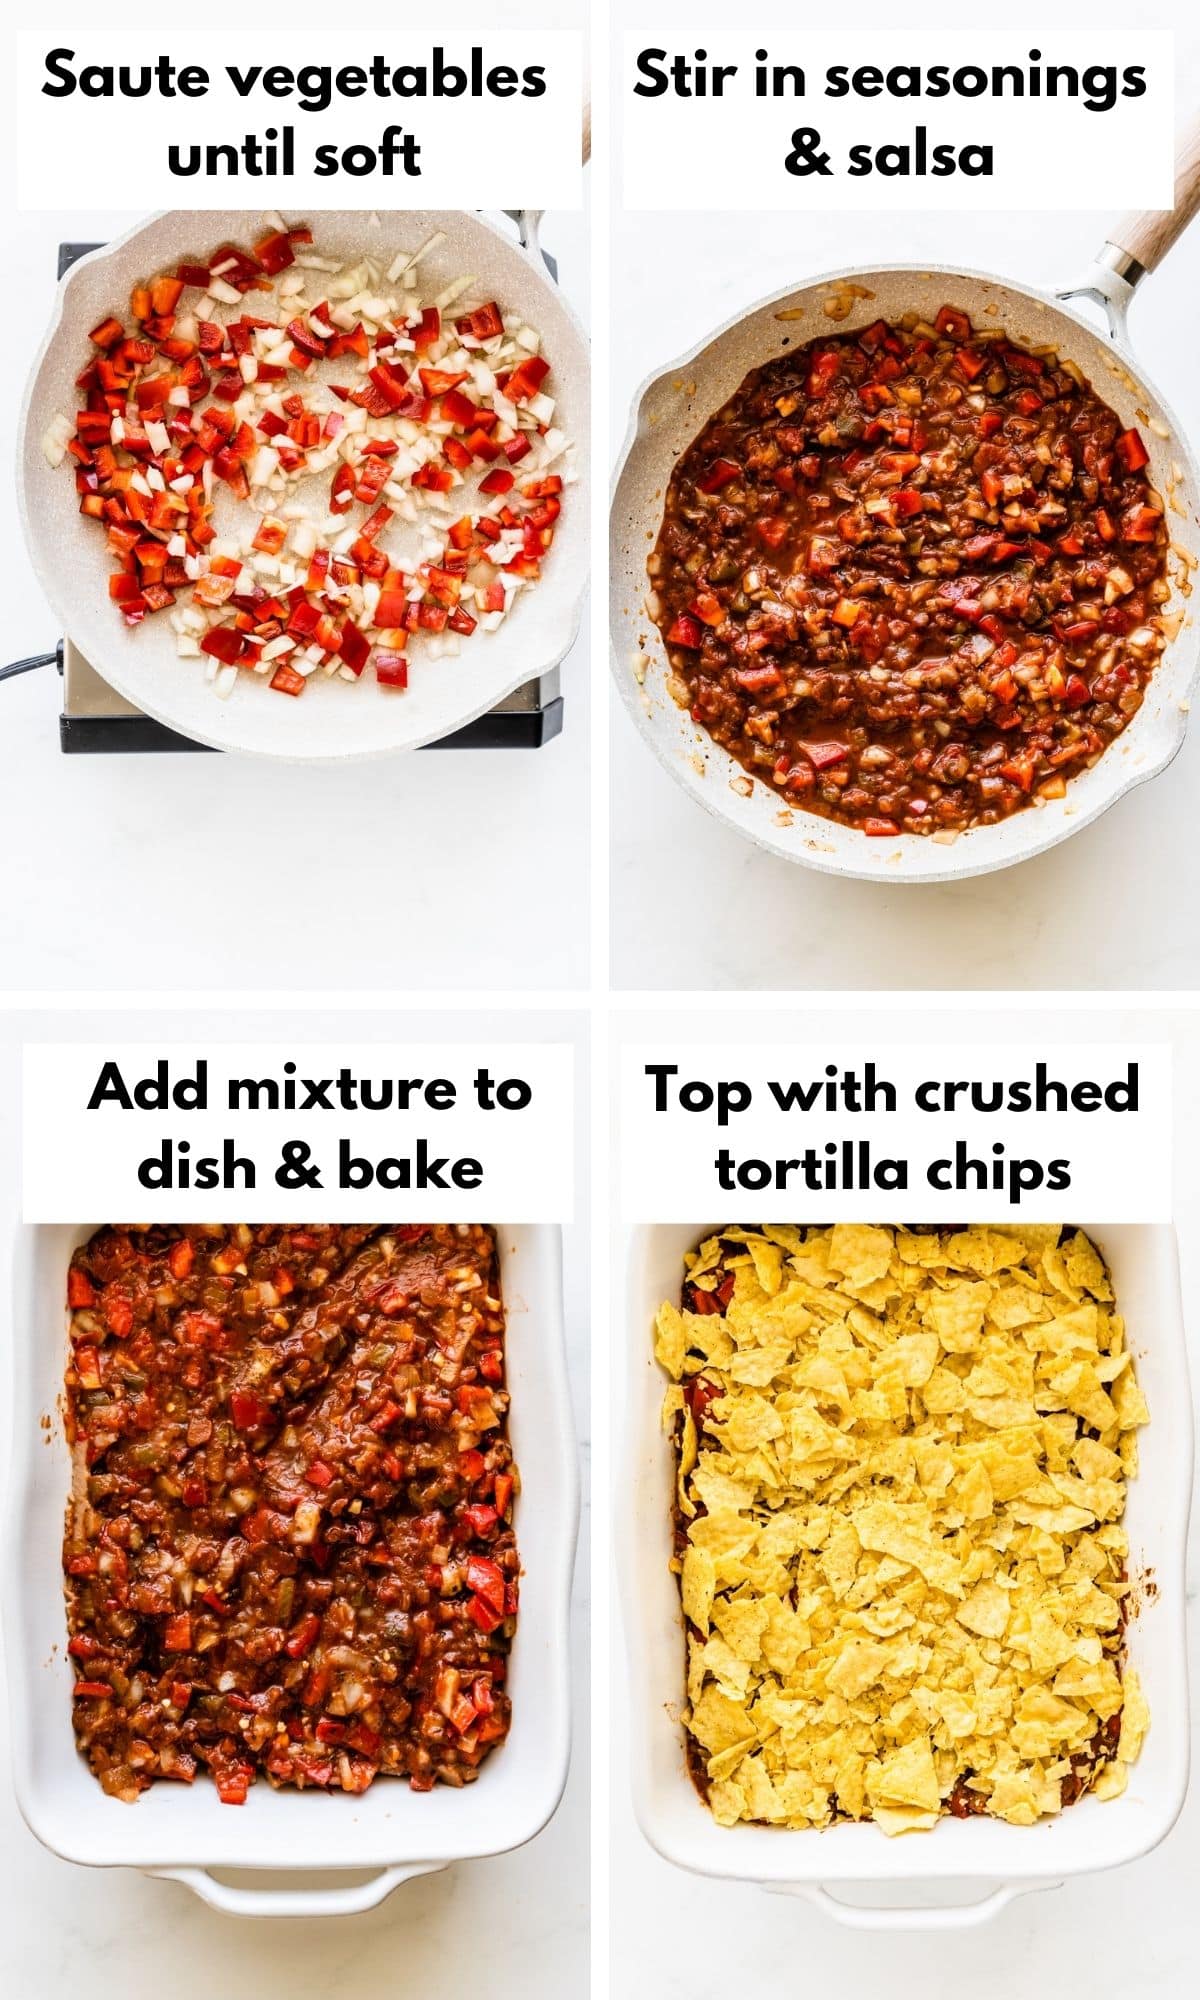 Pictures showing how to make a mexican casserole